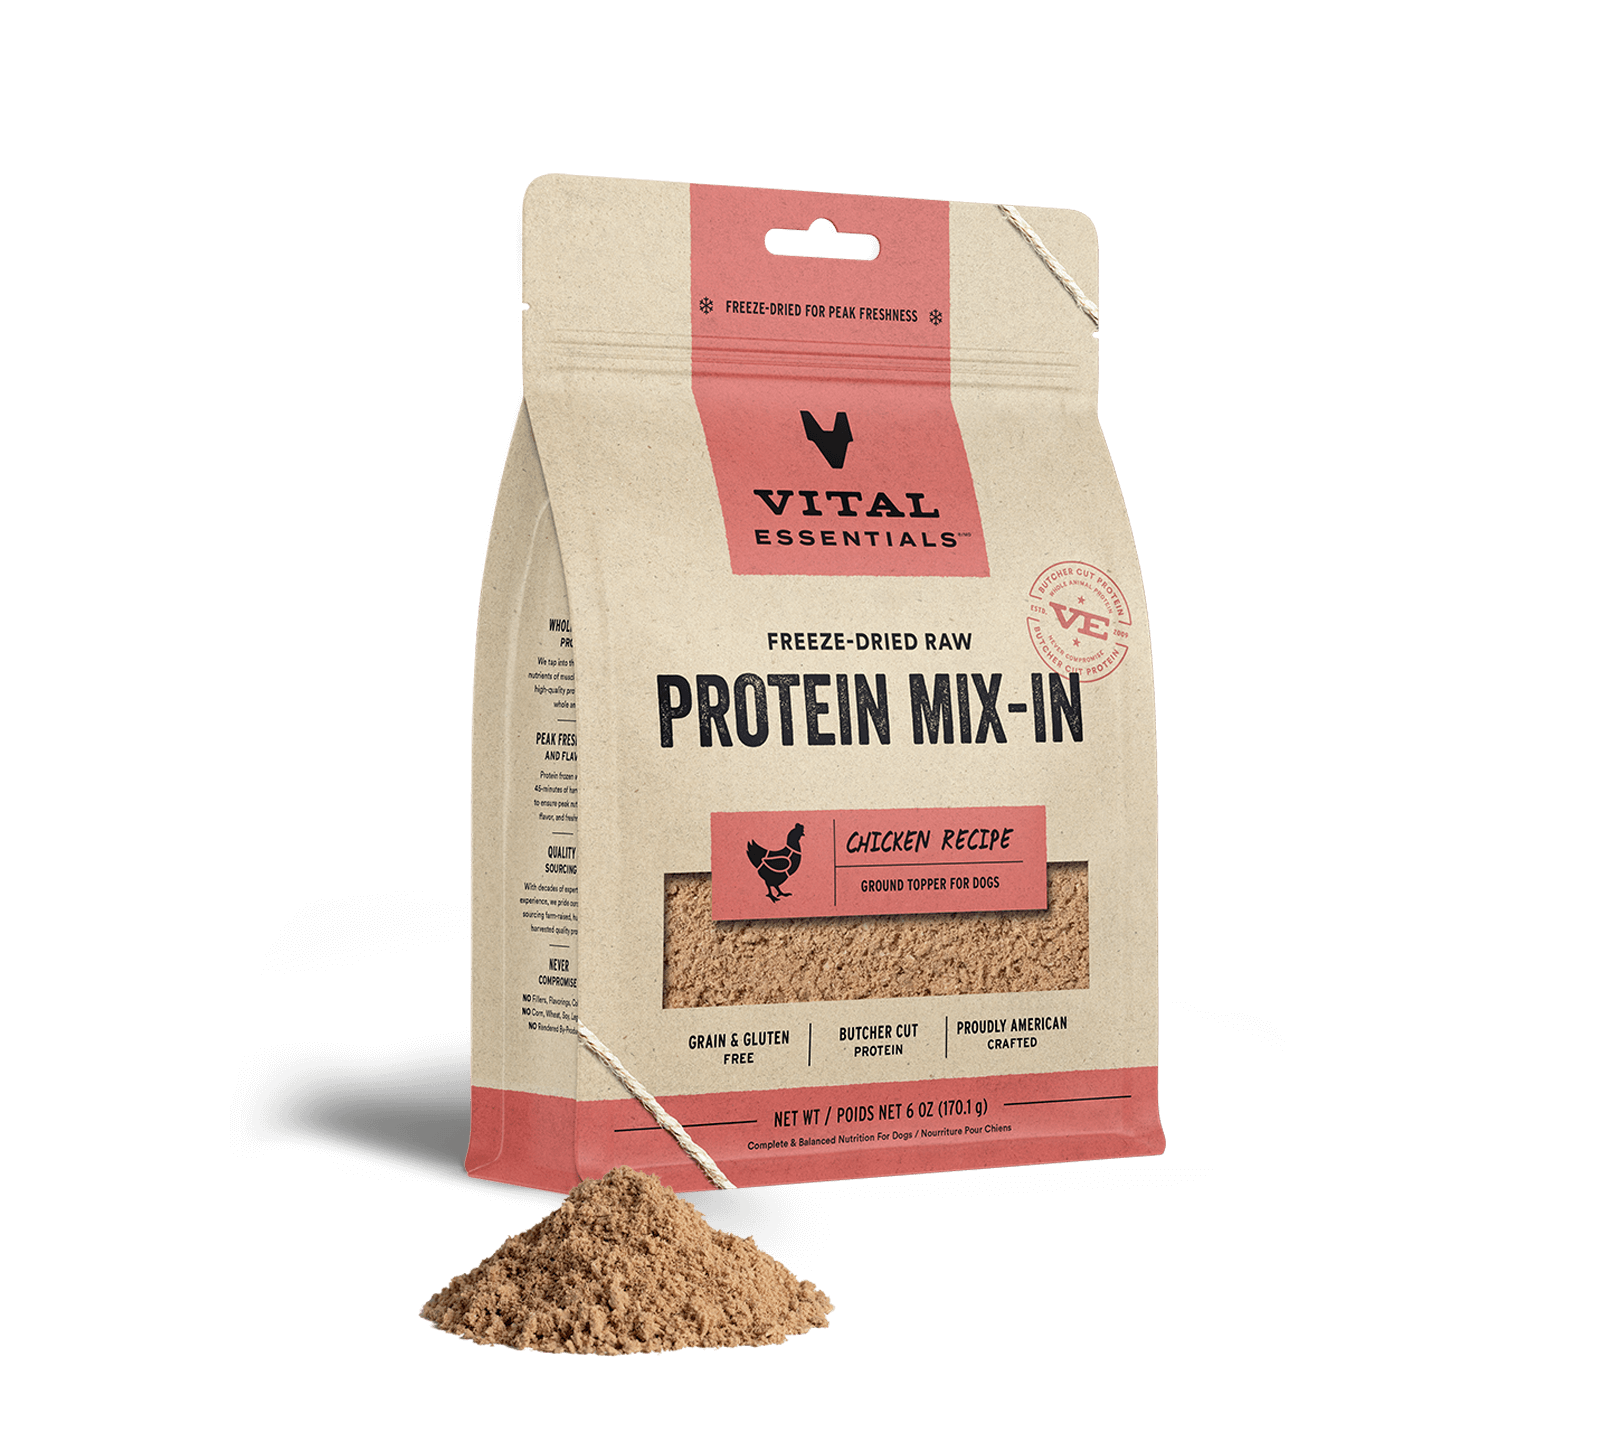 Vital Essentials Freeze-Dried Raw Protein Mix-In Chicken Recipe Ground Topper for Dogs, 6 oz - Health/First Aid